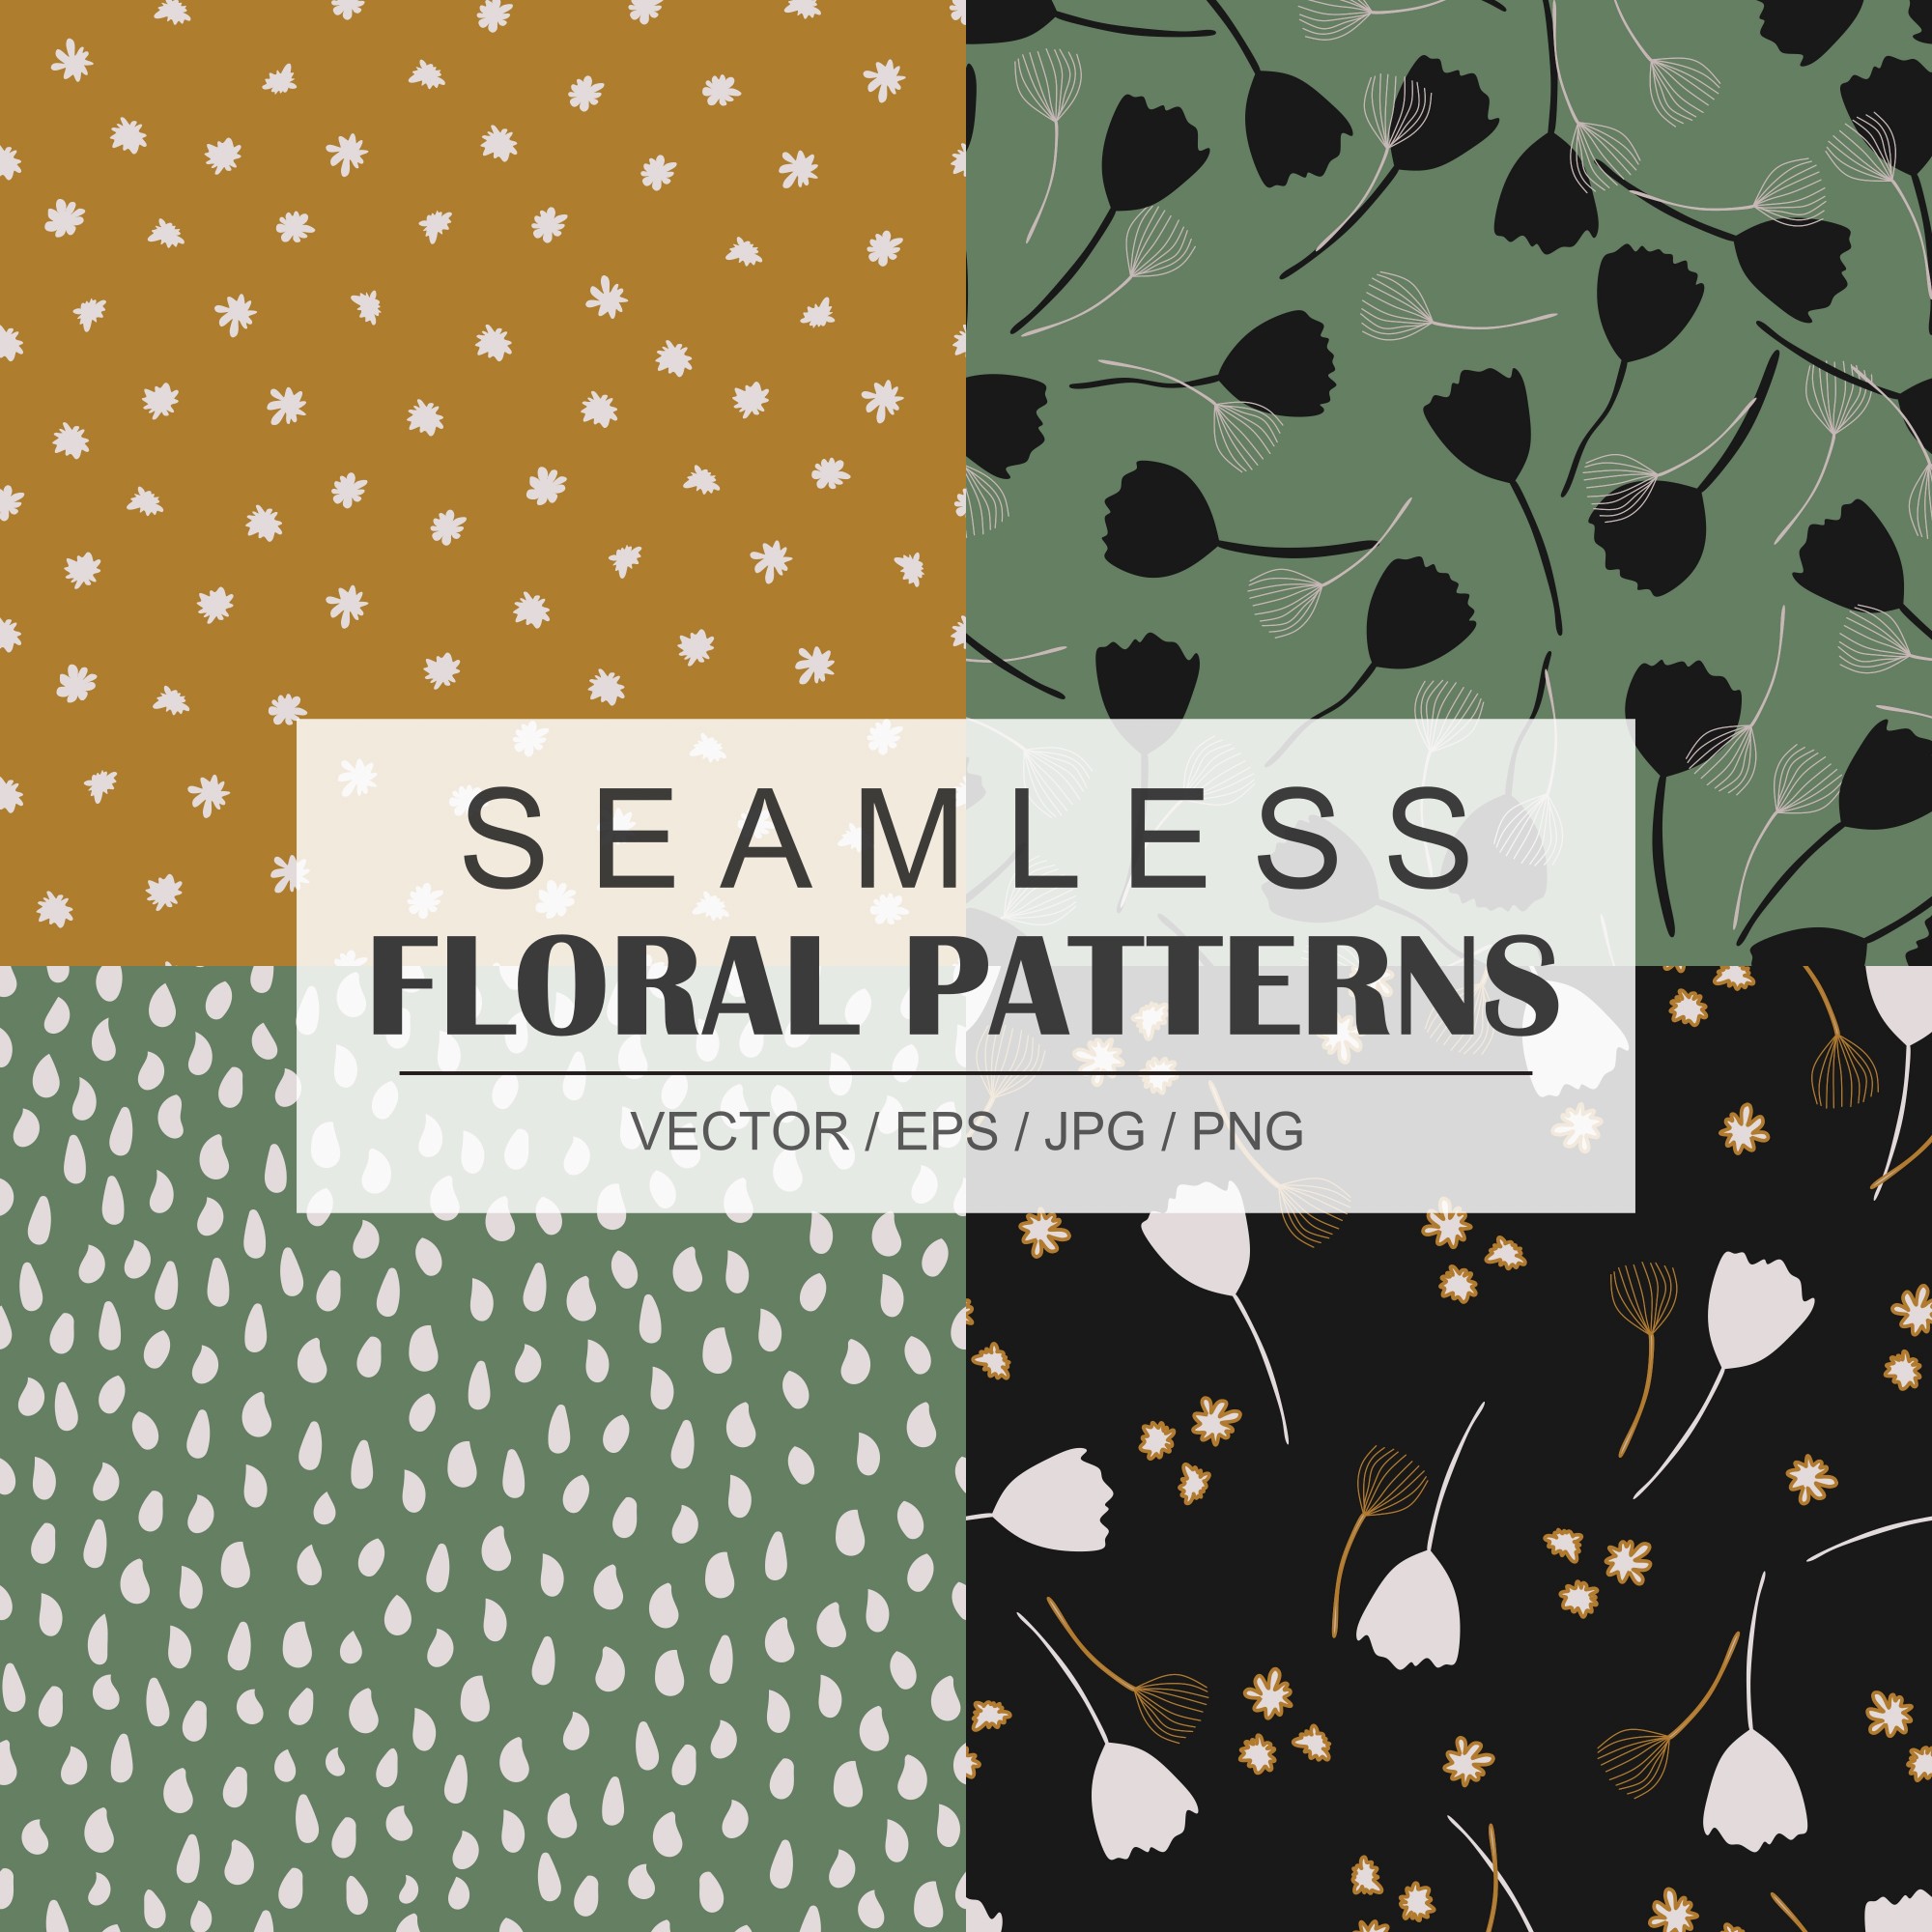 Colorful Flowers Seamless Pattern Fabric Textile Wallpaper Wrapping Paper  Background Backgrounds